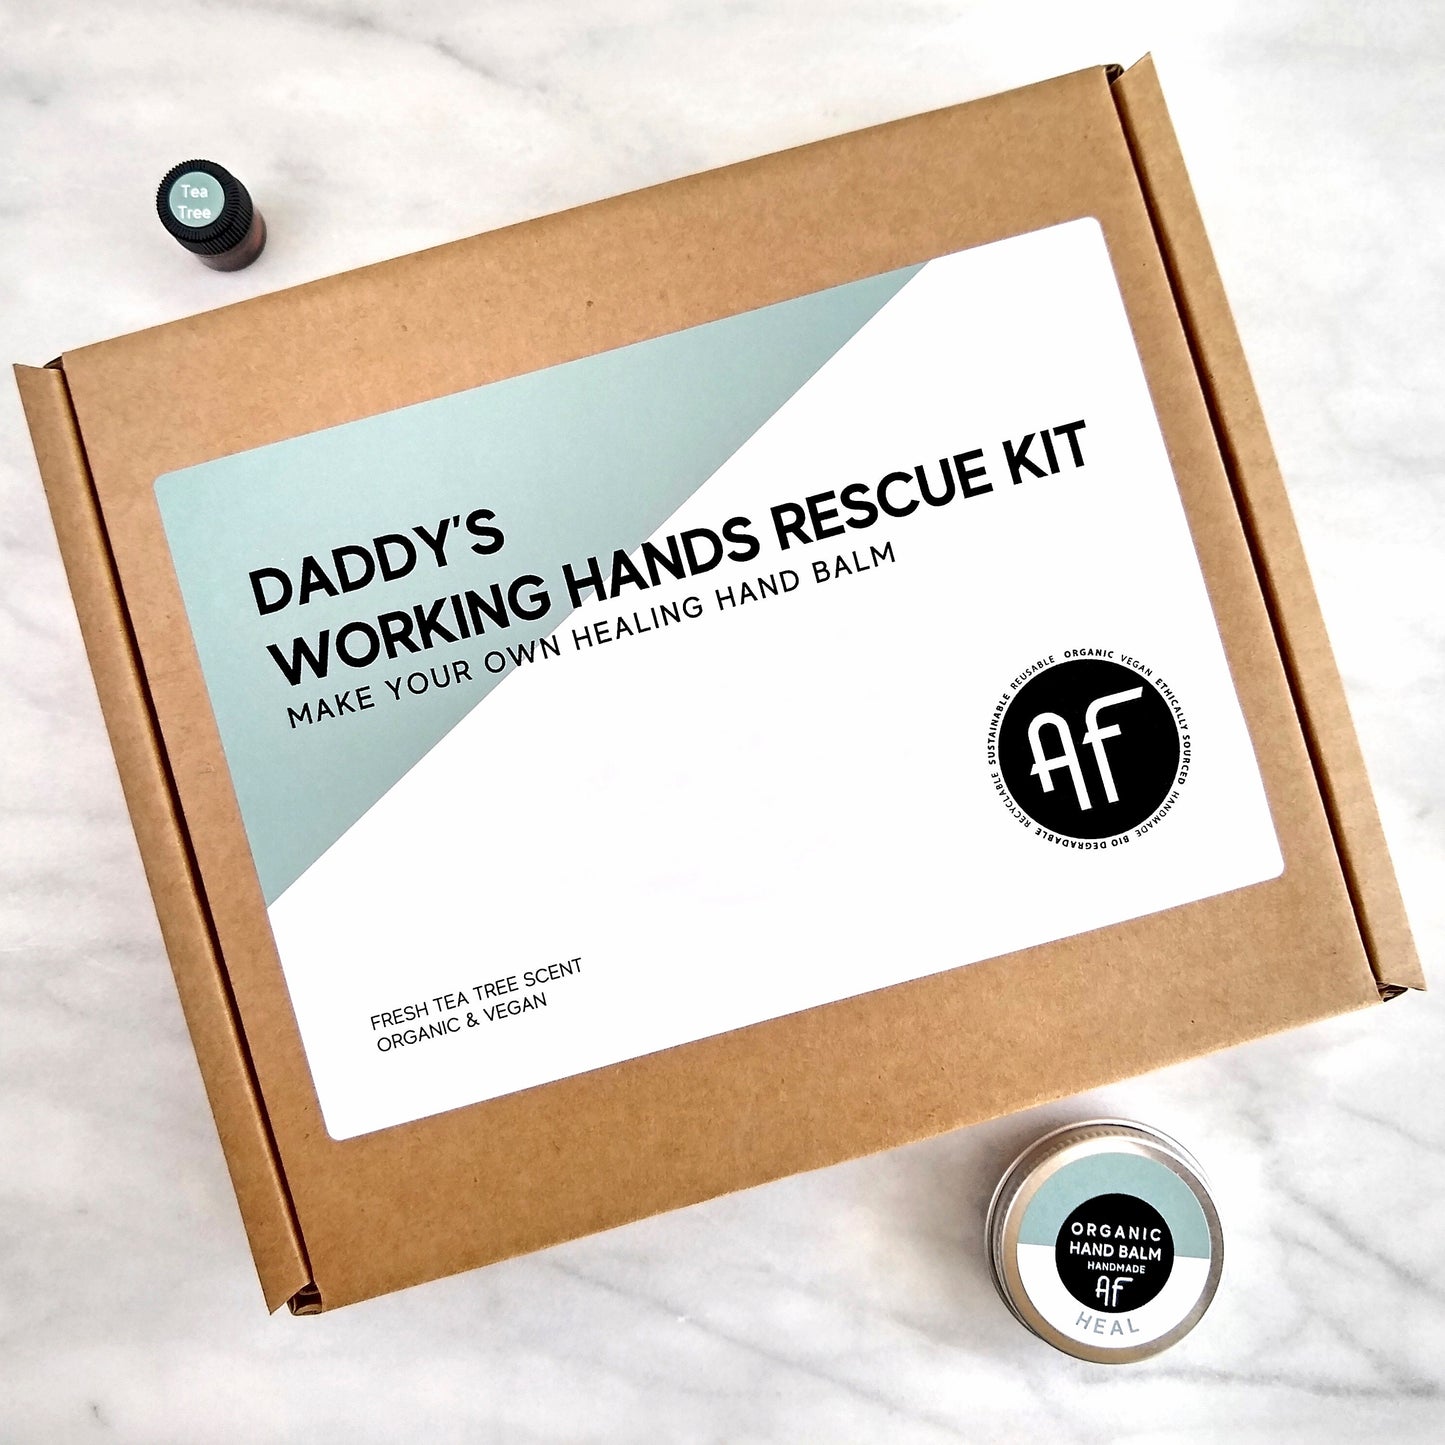 Personalised Daddy’s DIY Working Hands Rescue Kit